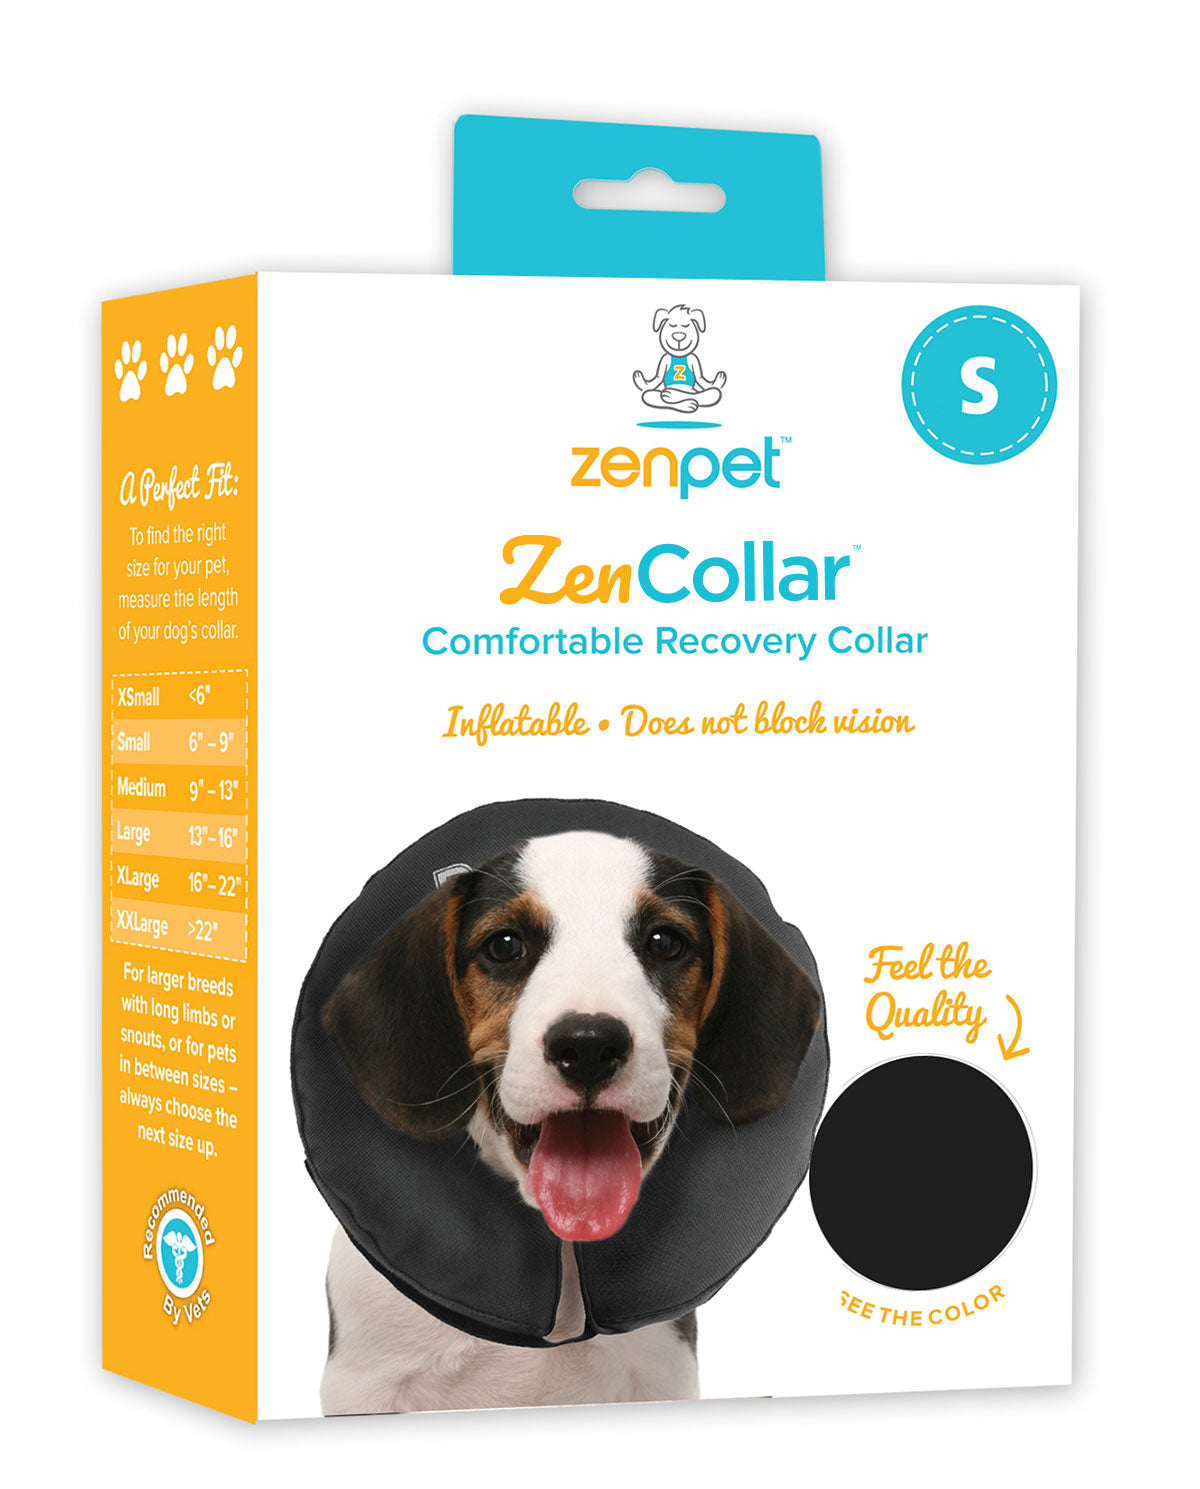 Zen Pet ZenCone Soft Recovery Collar for Dogs, Large